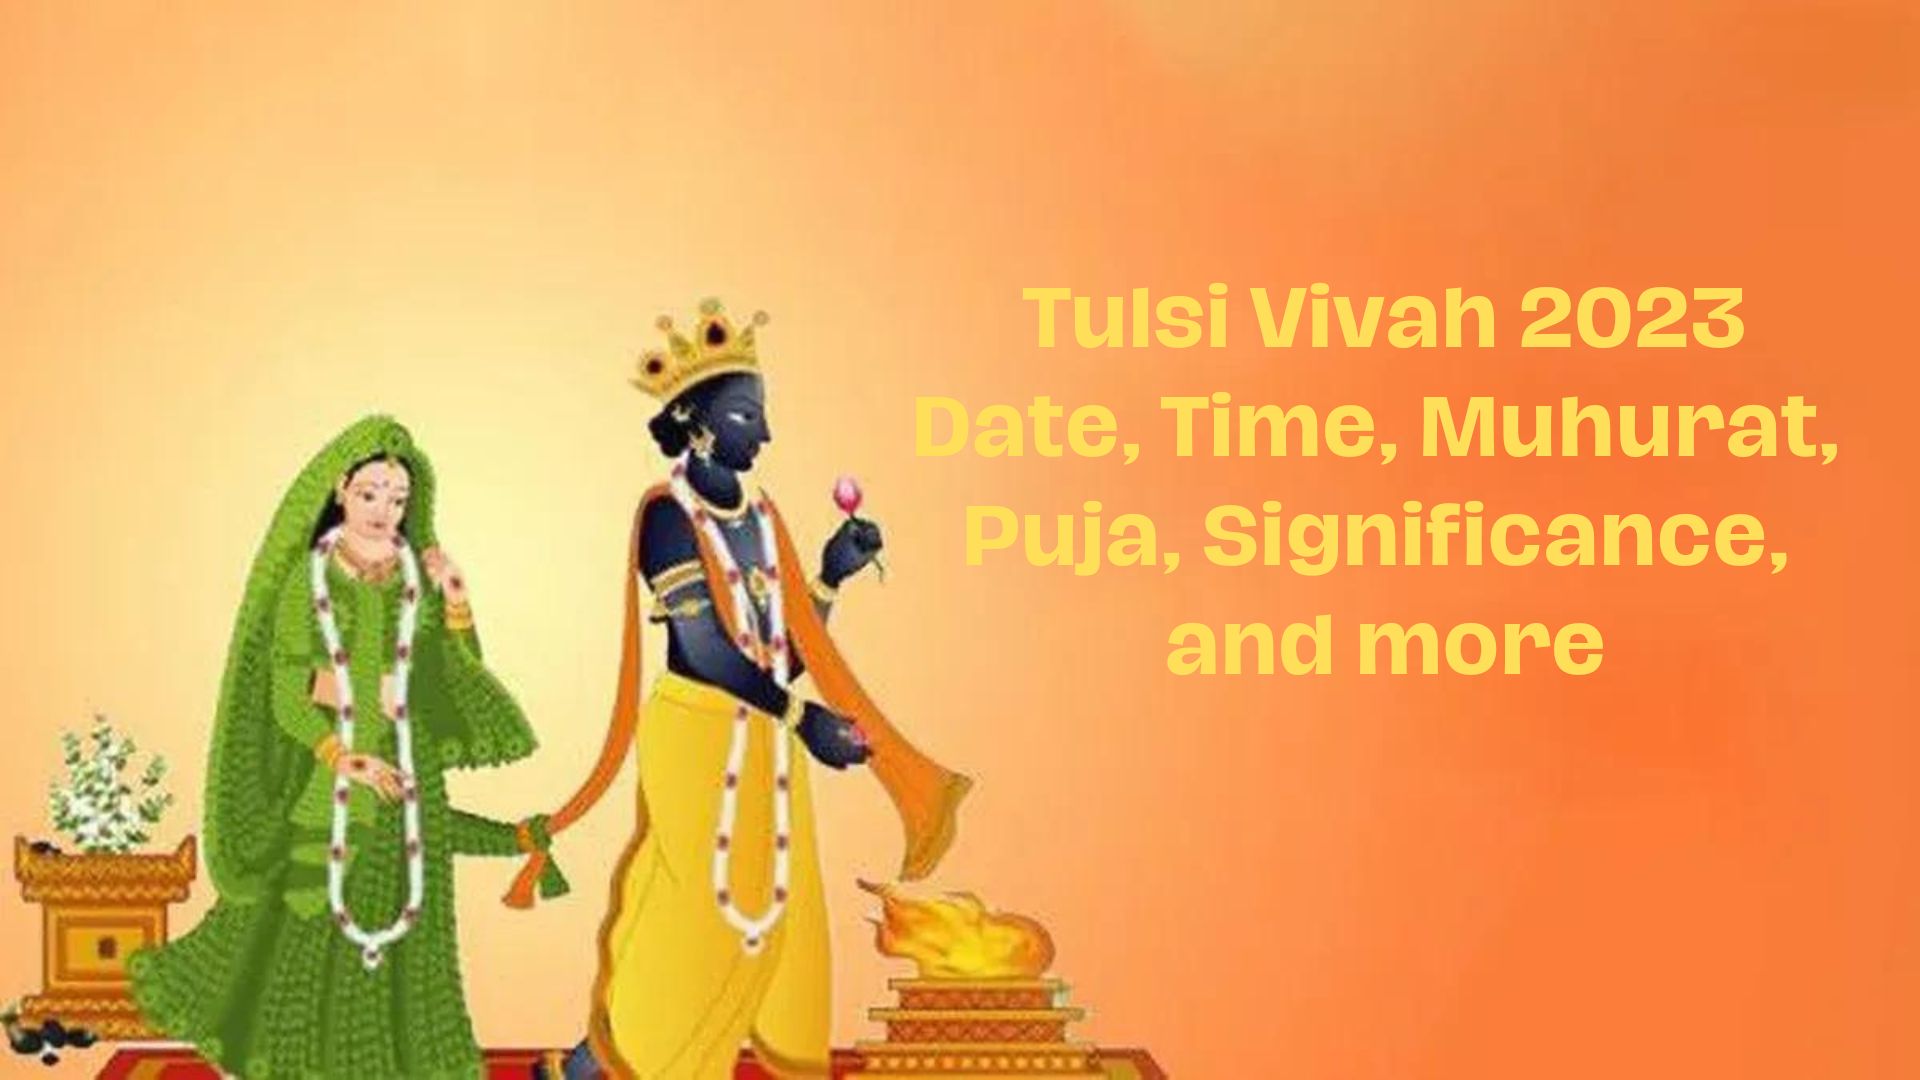 Tulsi Vivah 2023 Date, Time, Muhurat, Puja, Significance, and more